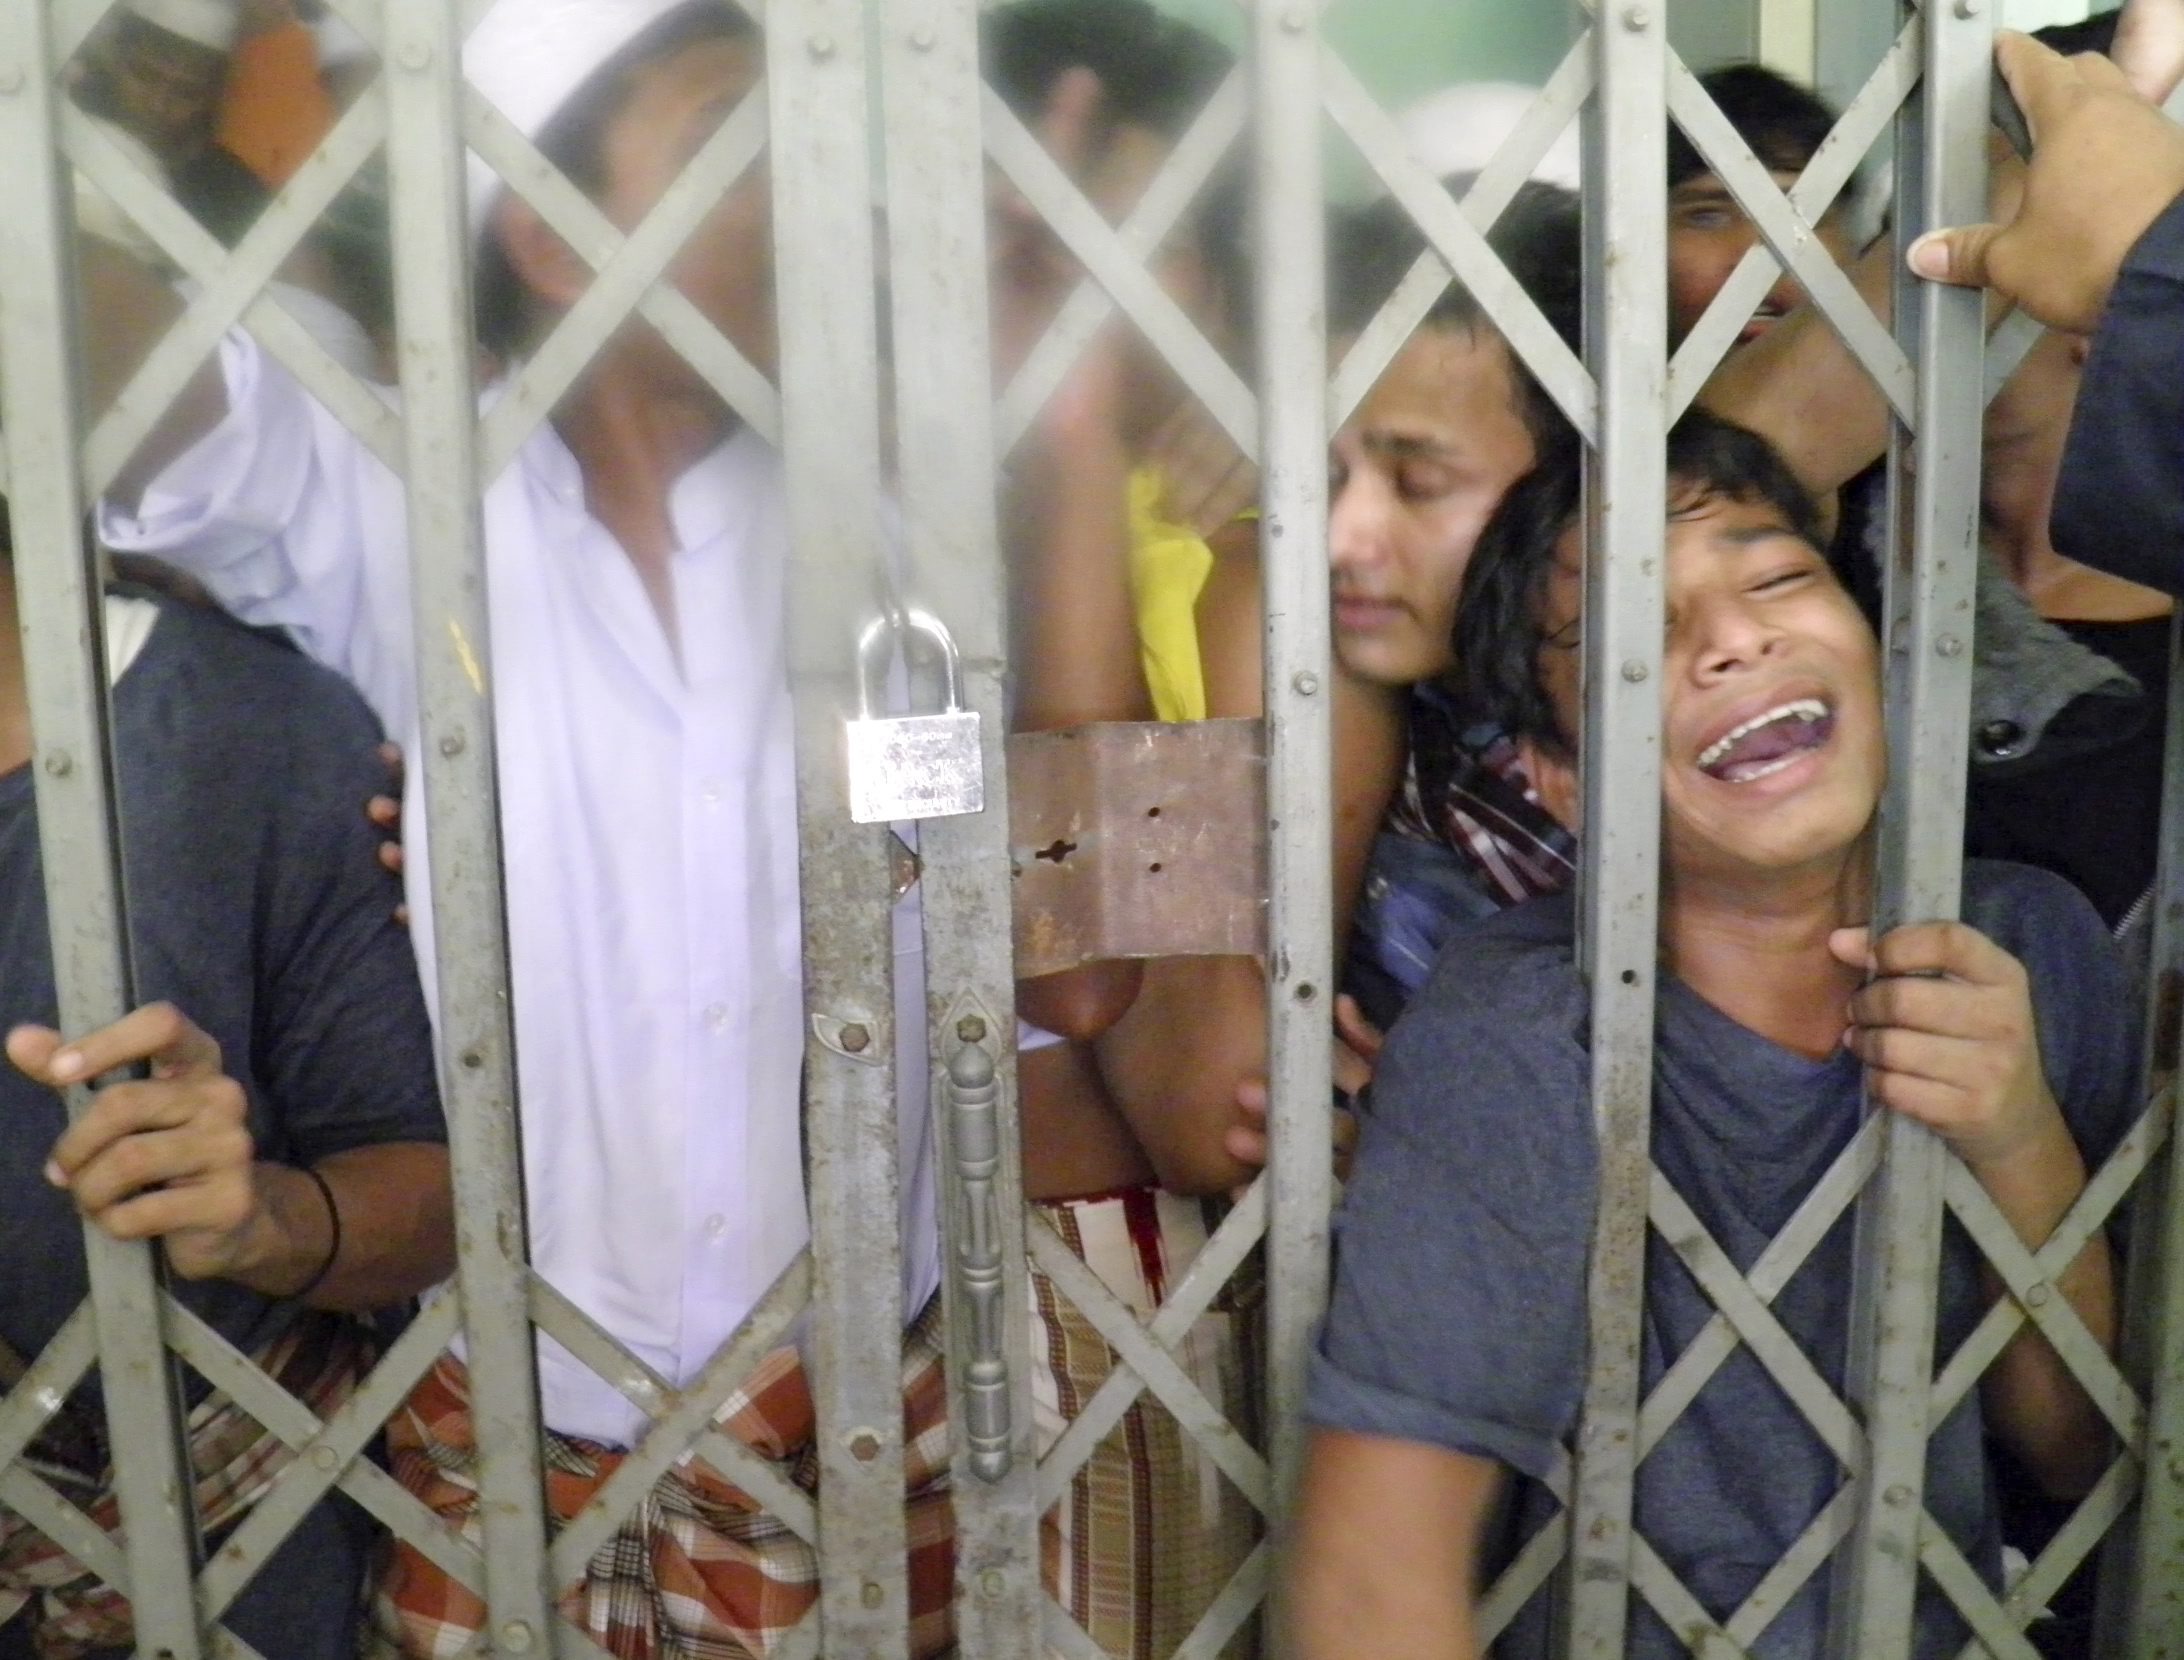 Muslim Rohingya refugees from Myanmar gather behind bars of a locked room at a detention centre in Phang Nga province, southern Thailand. Photo: EPA